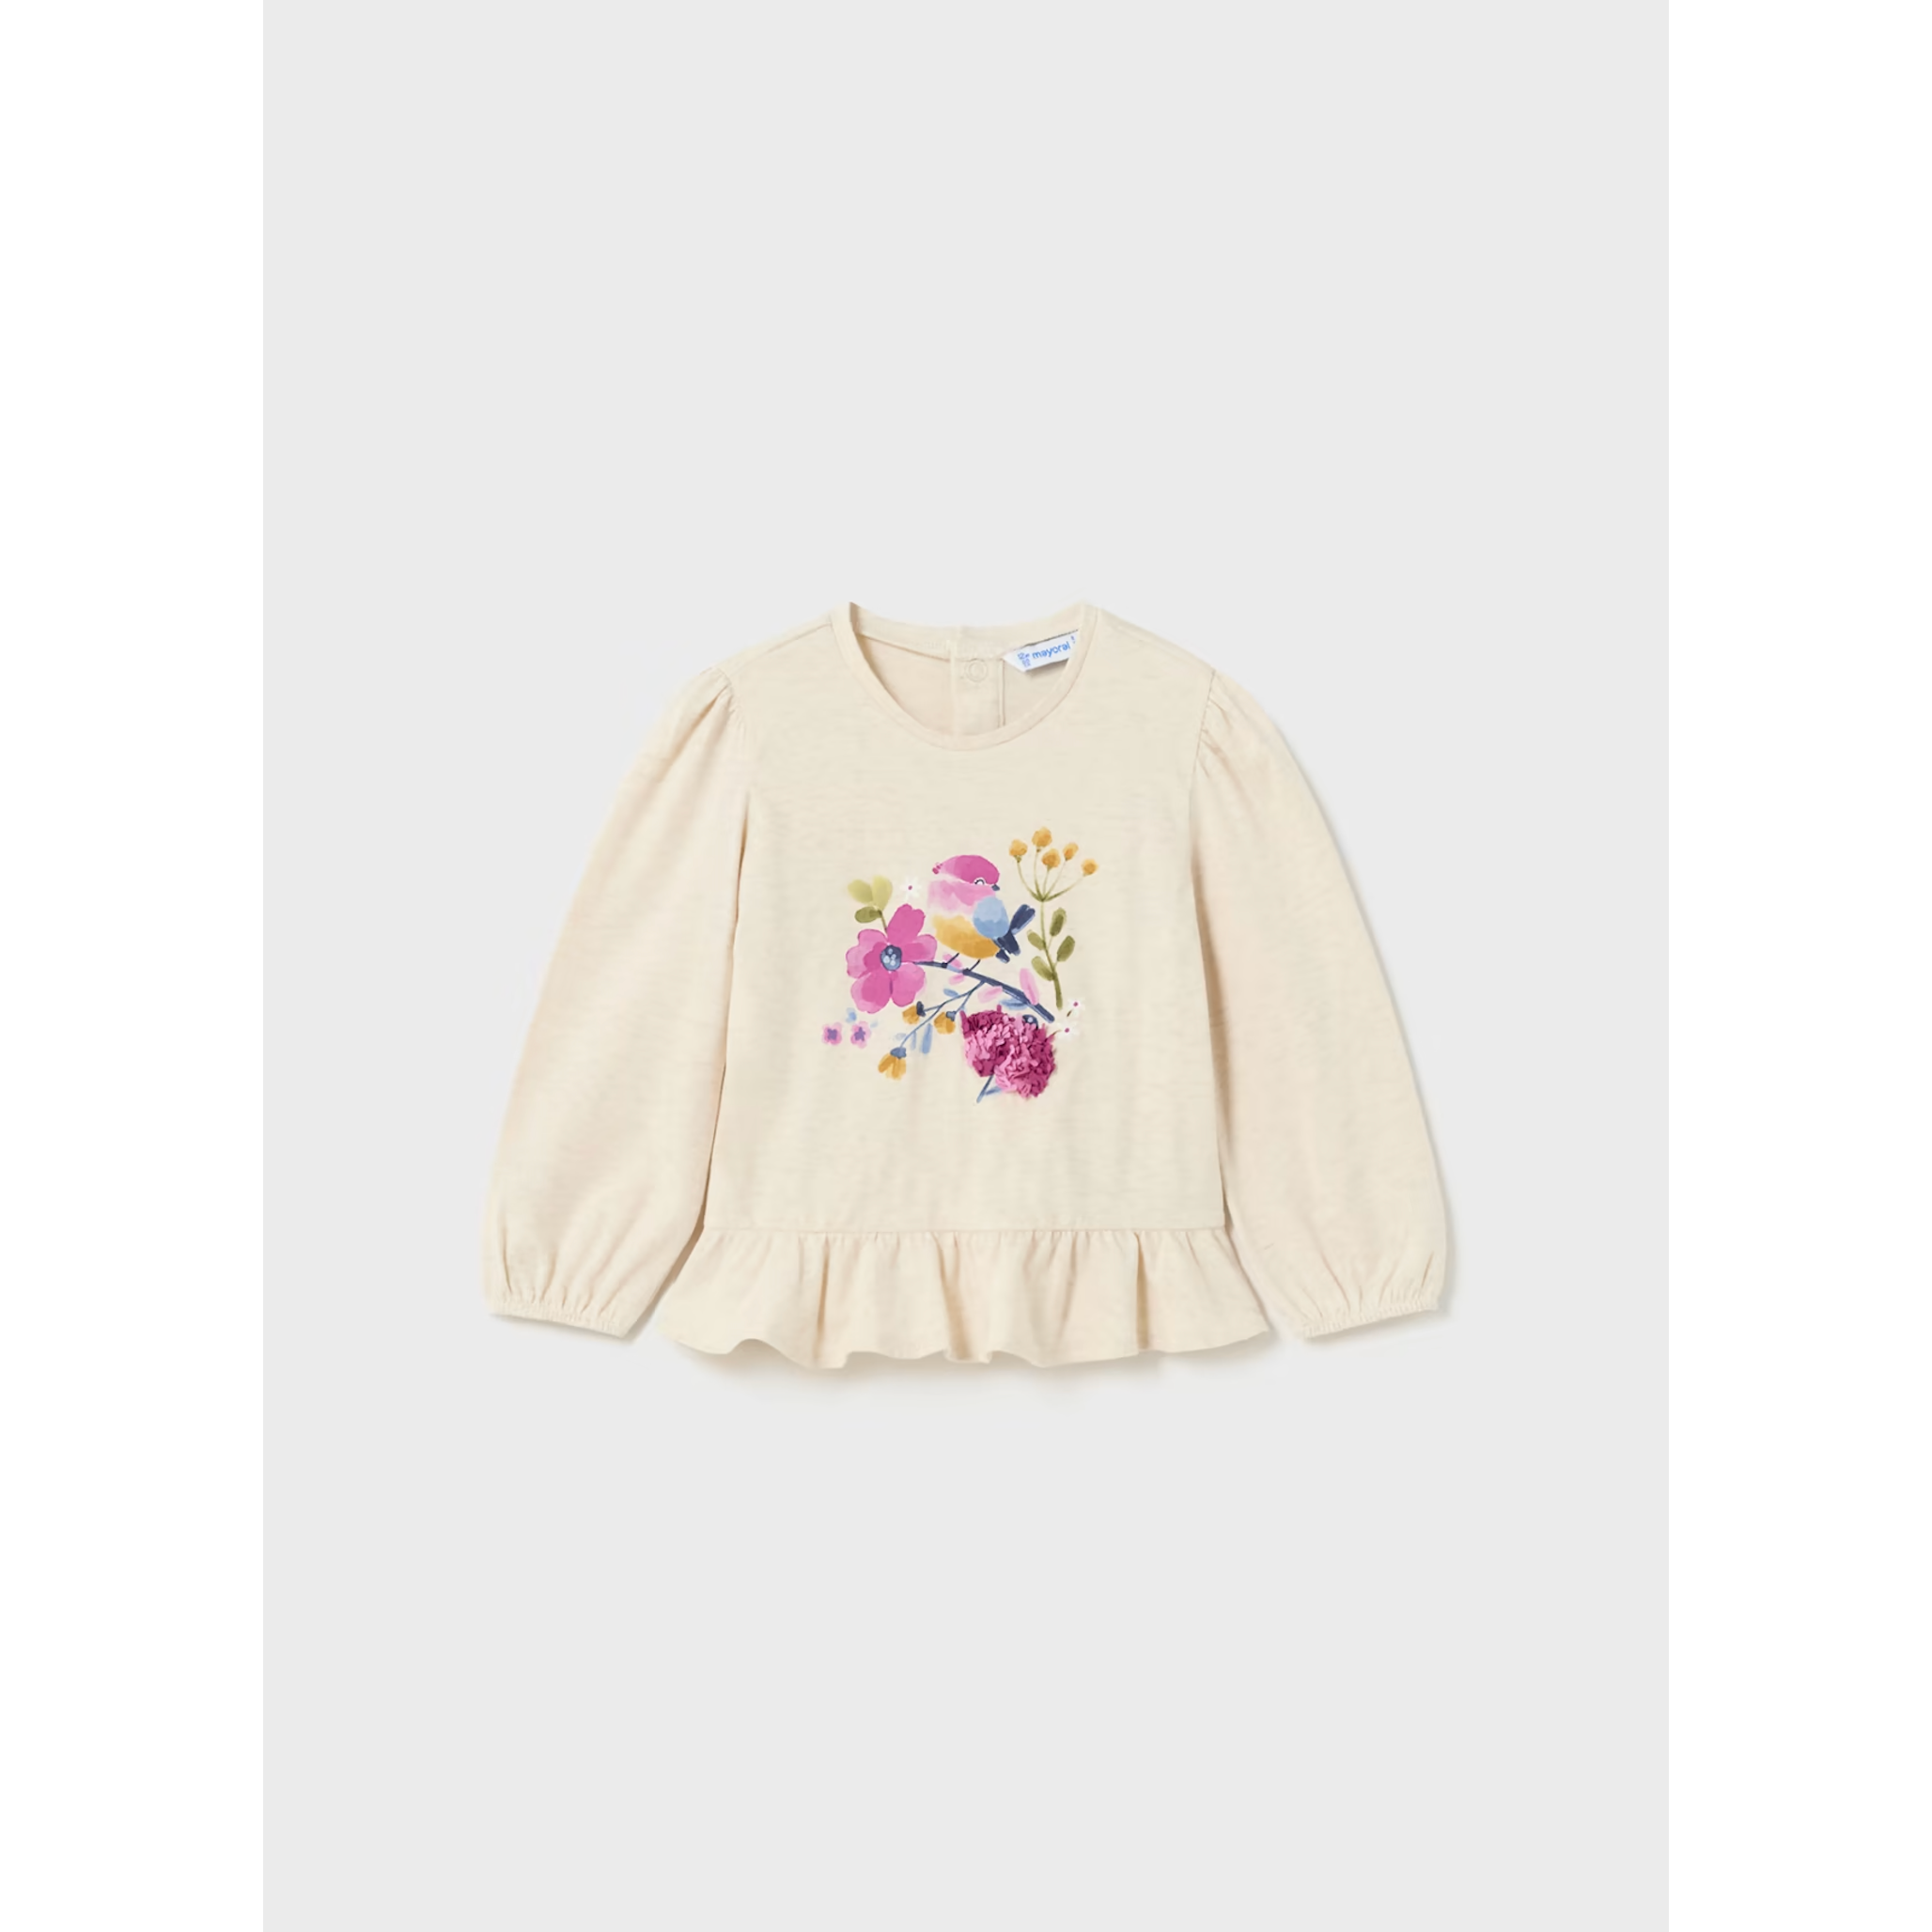 Mayoral Cream Floral Ruffle Top-MAYORAL-Little Giant Kidz